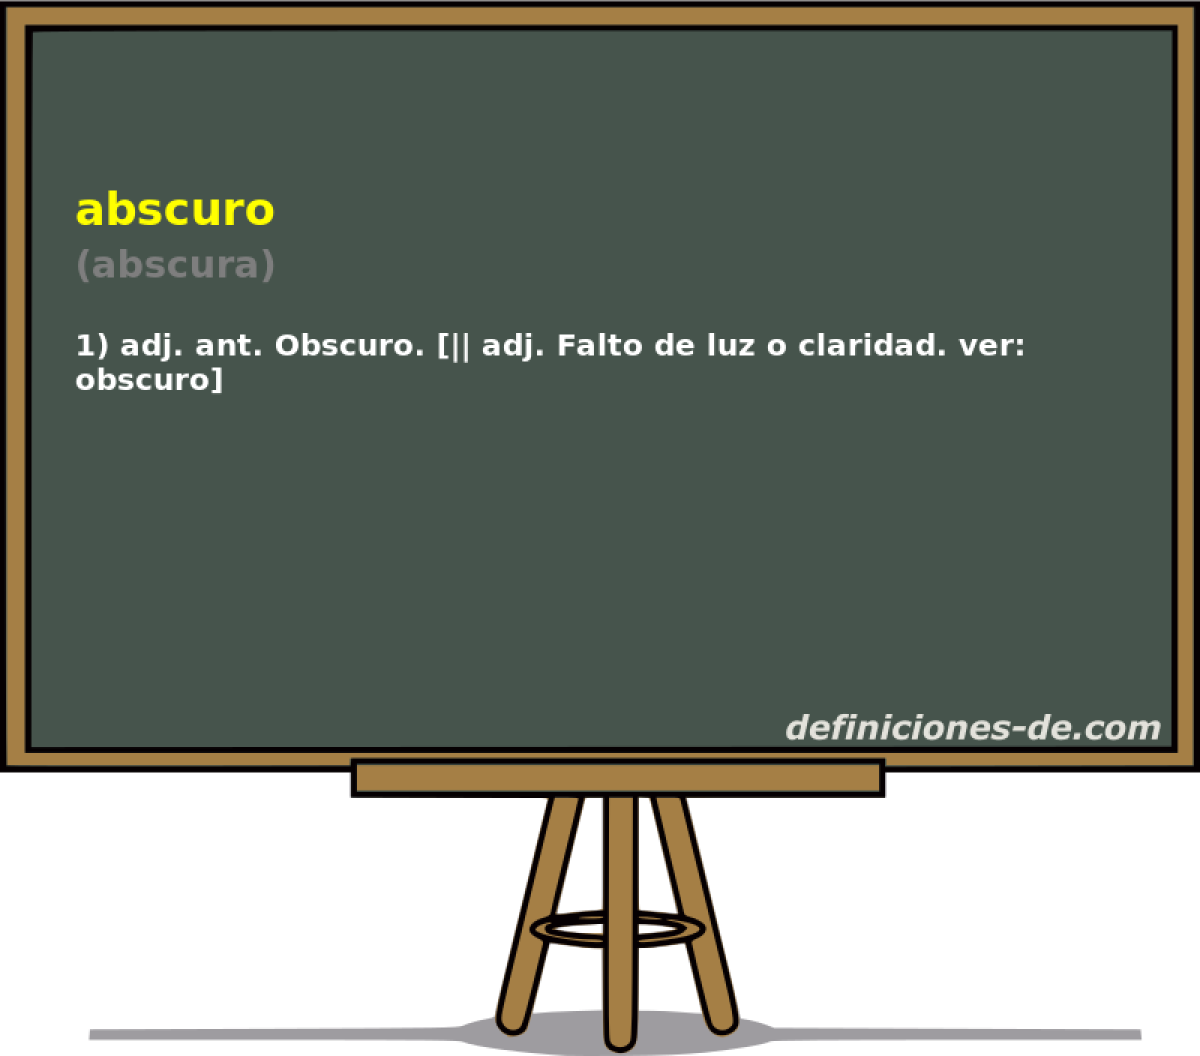 abscuro (abscura)